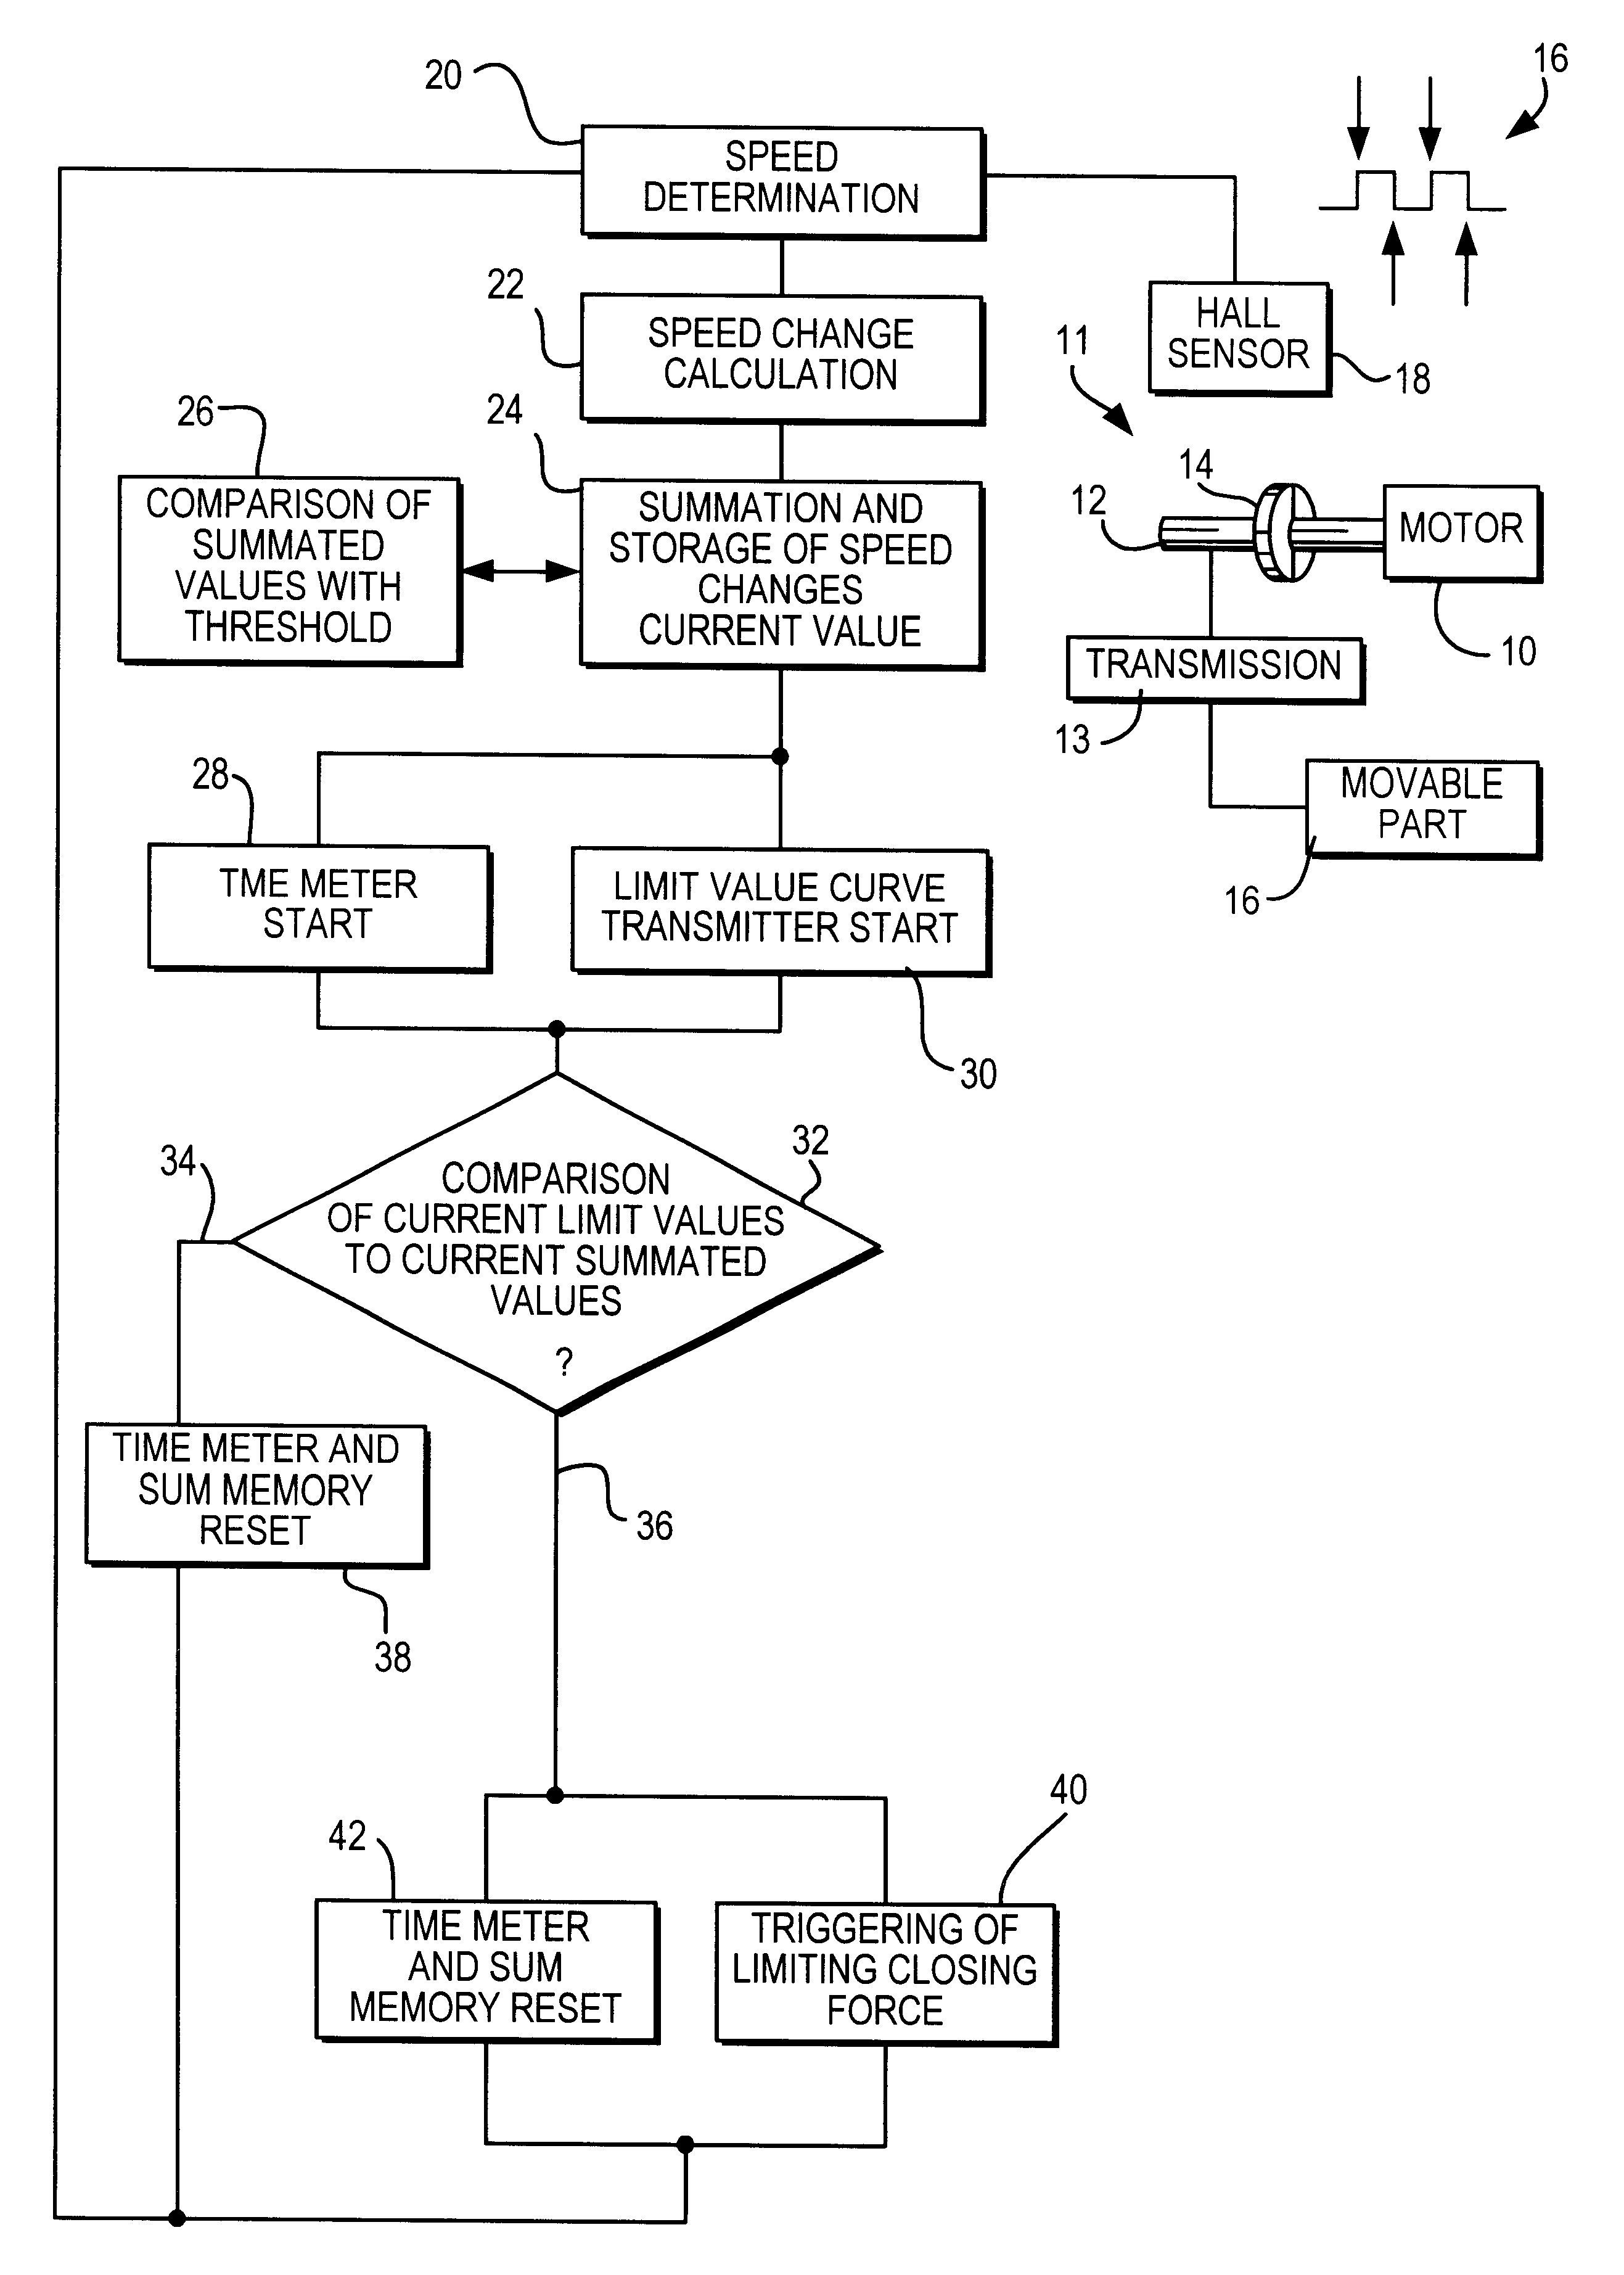 Method for limiting the closing force of movable components